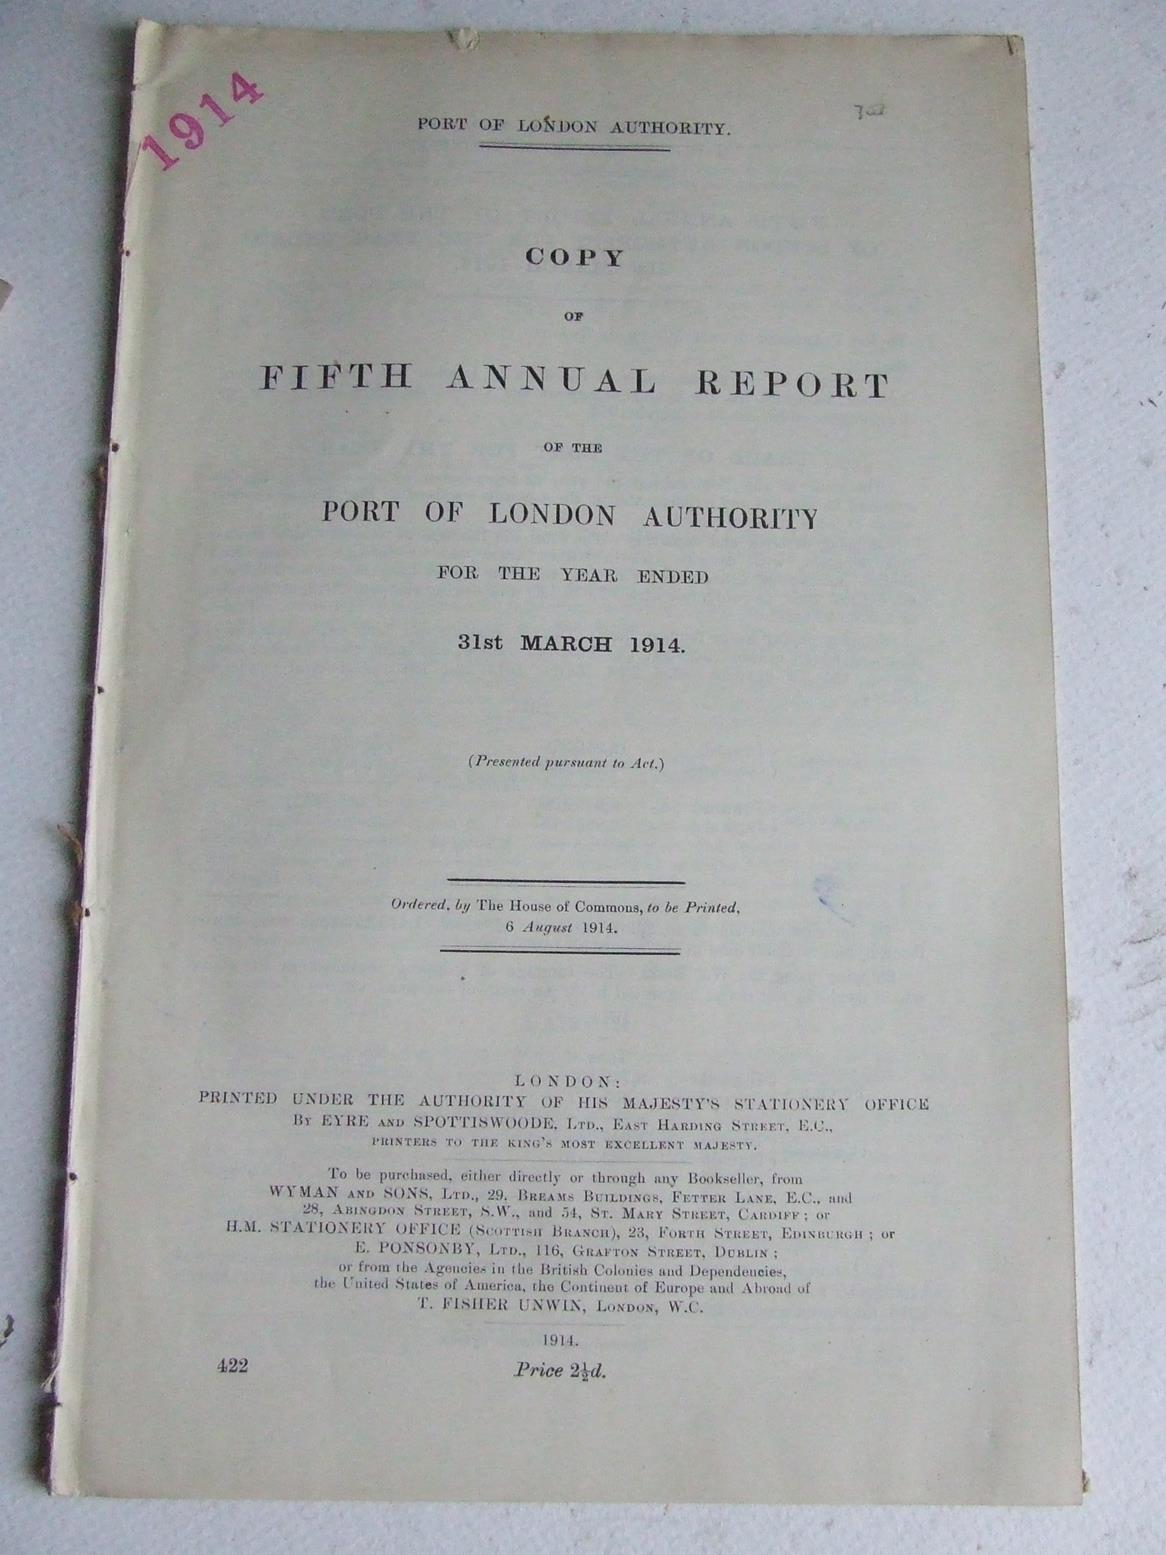 Fifth Annual Report of the Port of London Authority for the year ended 31st March 1914